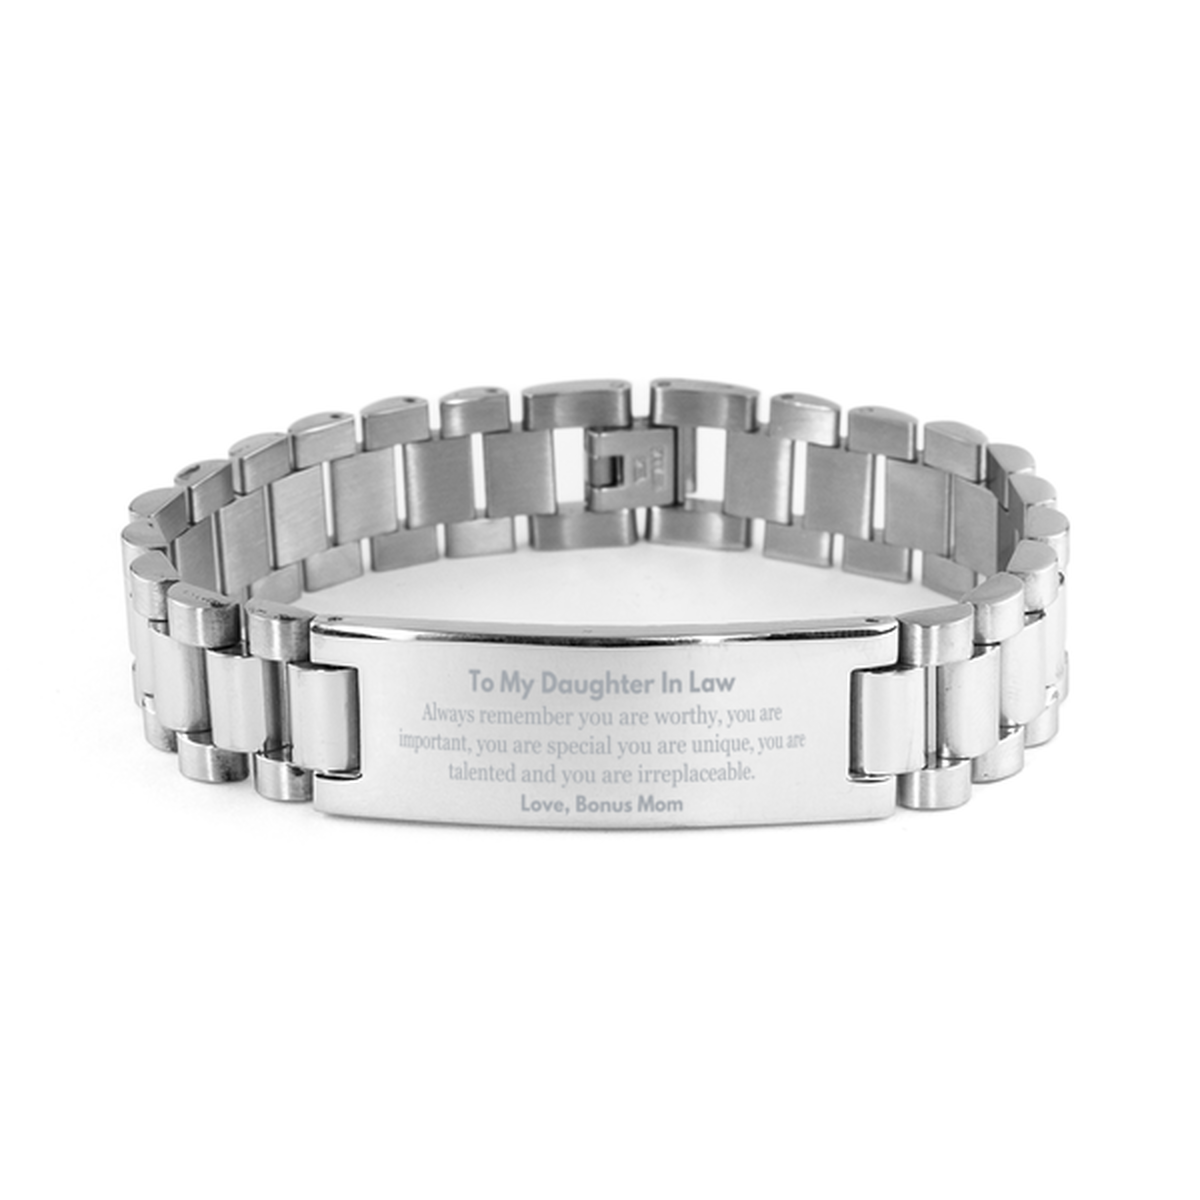 Daughter In Law Birthday Gifts from Bonus Mom, Inspirational Ladder Stainless Steel Bracelet for Daughter In Law Christmas Graduation Gifts for Daughter In Law Always remember you are worthy, you are important. Love, Bonus Mom